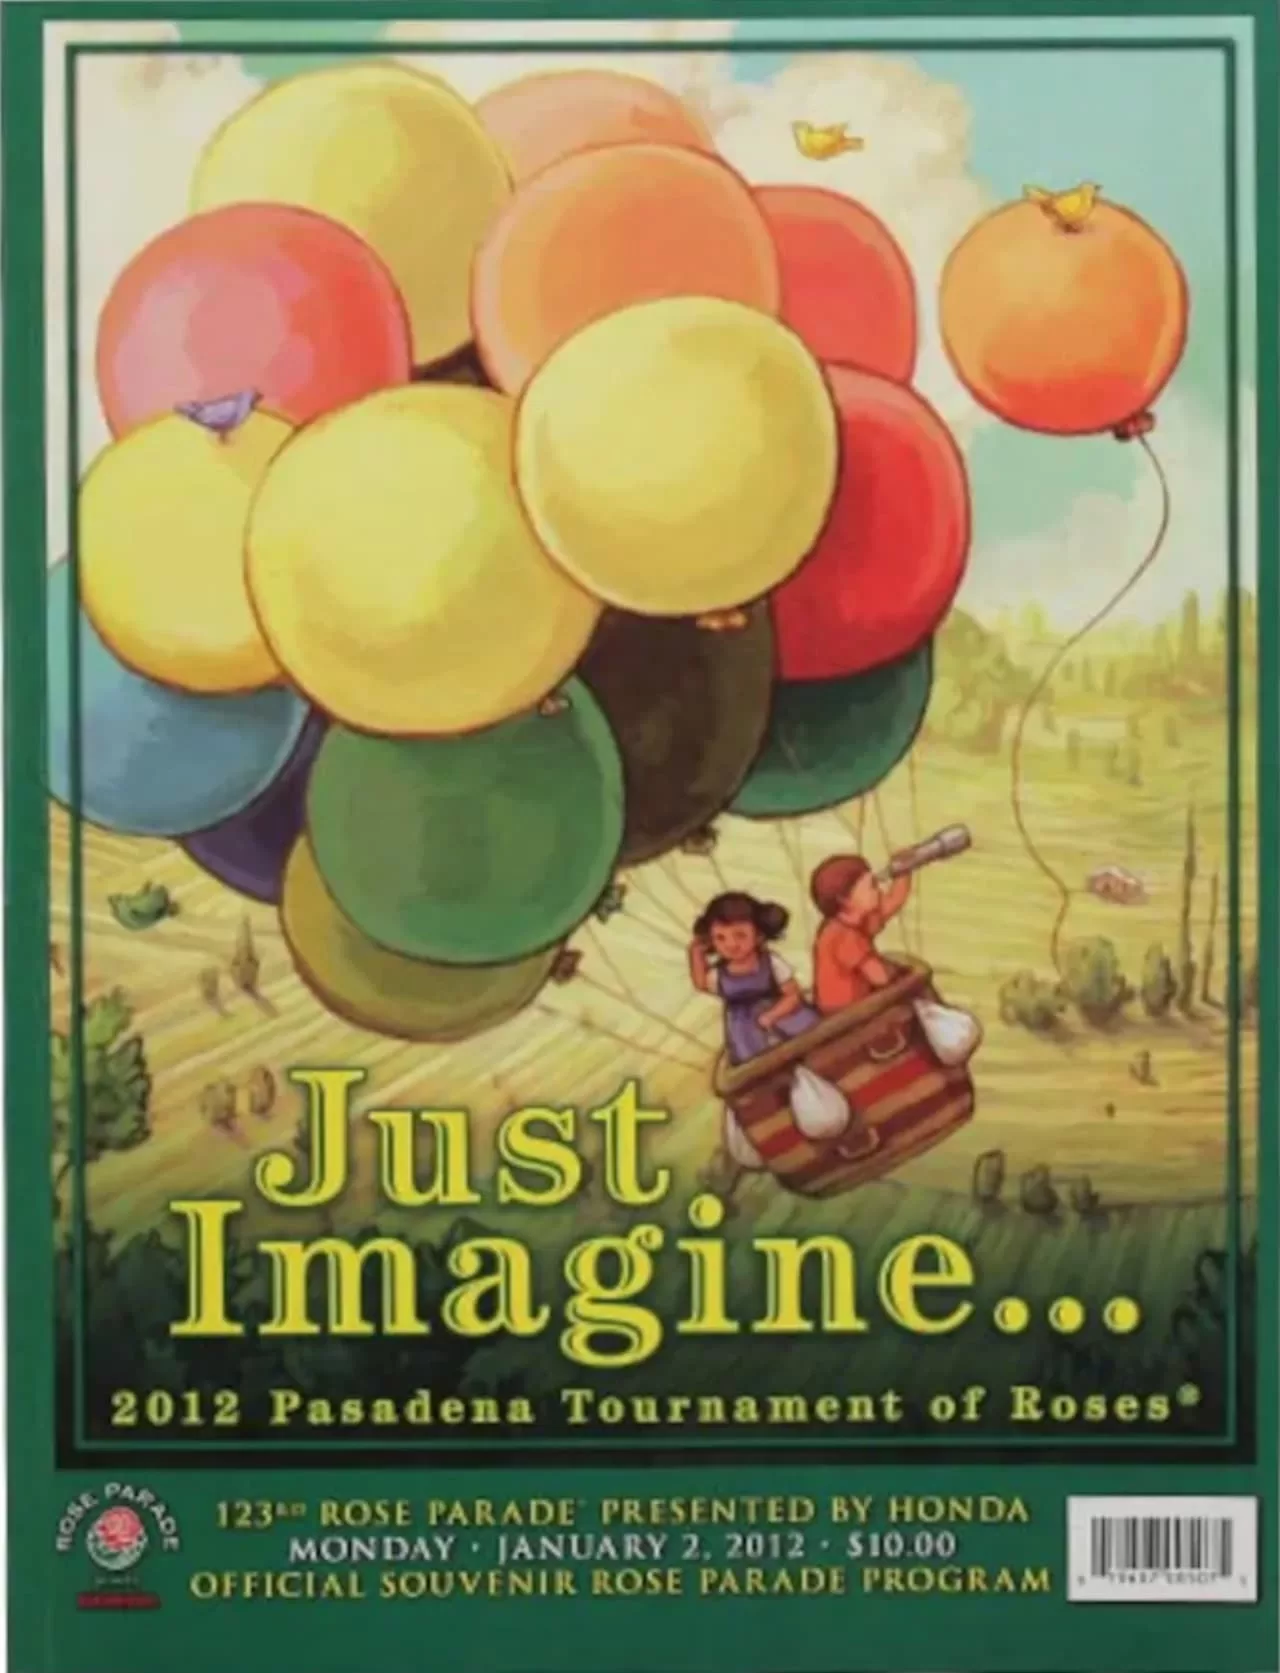 2012 Pasadena Tournament of Roses program cover with colorful balloons and flying children